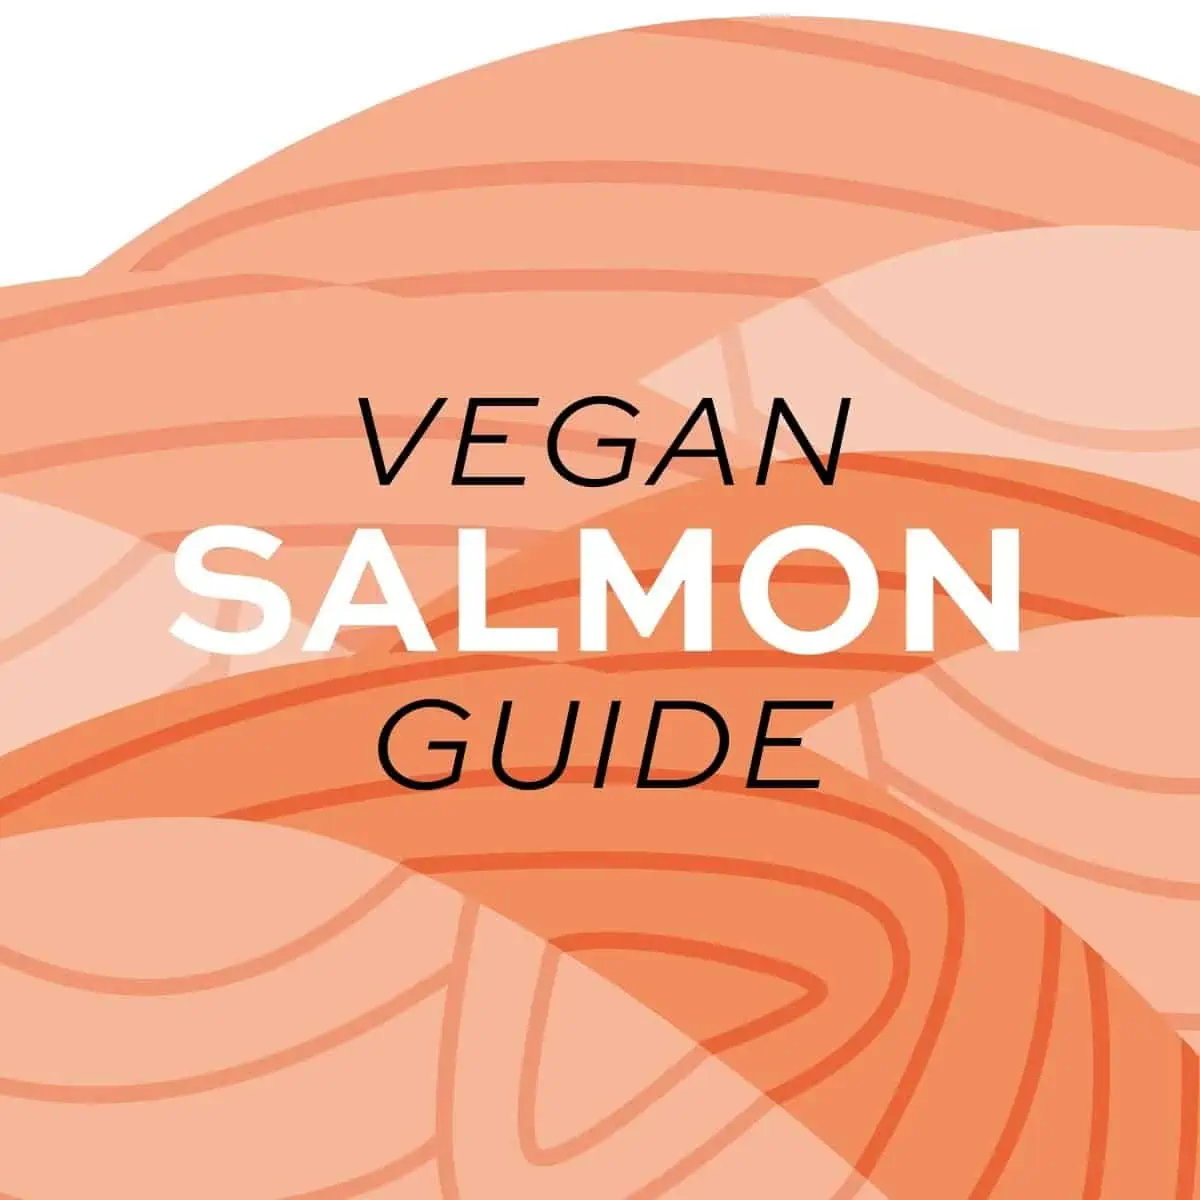 Vegan Salmon: The Complete Guide to Nutrition, Brands, and Recipes